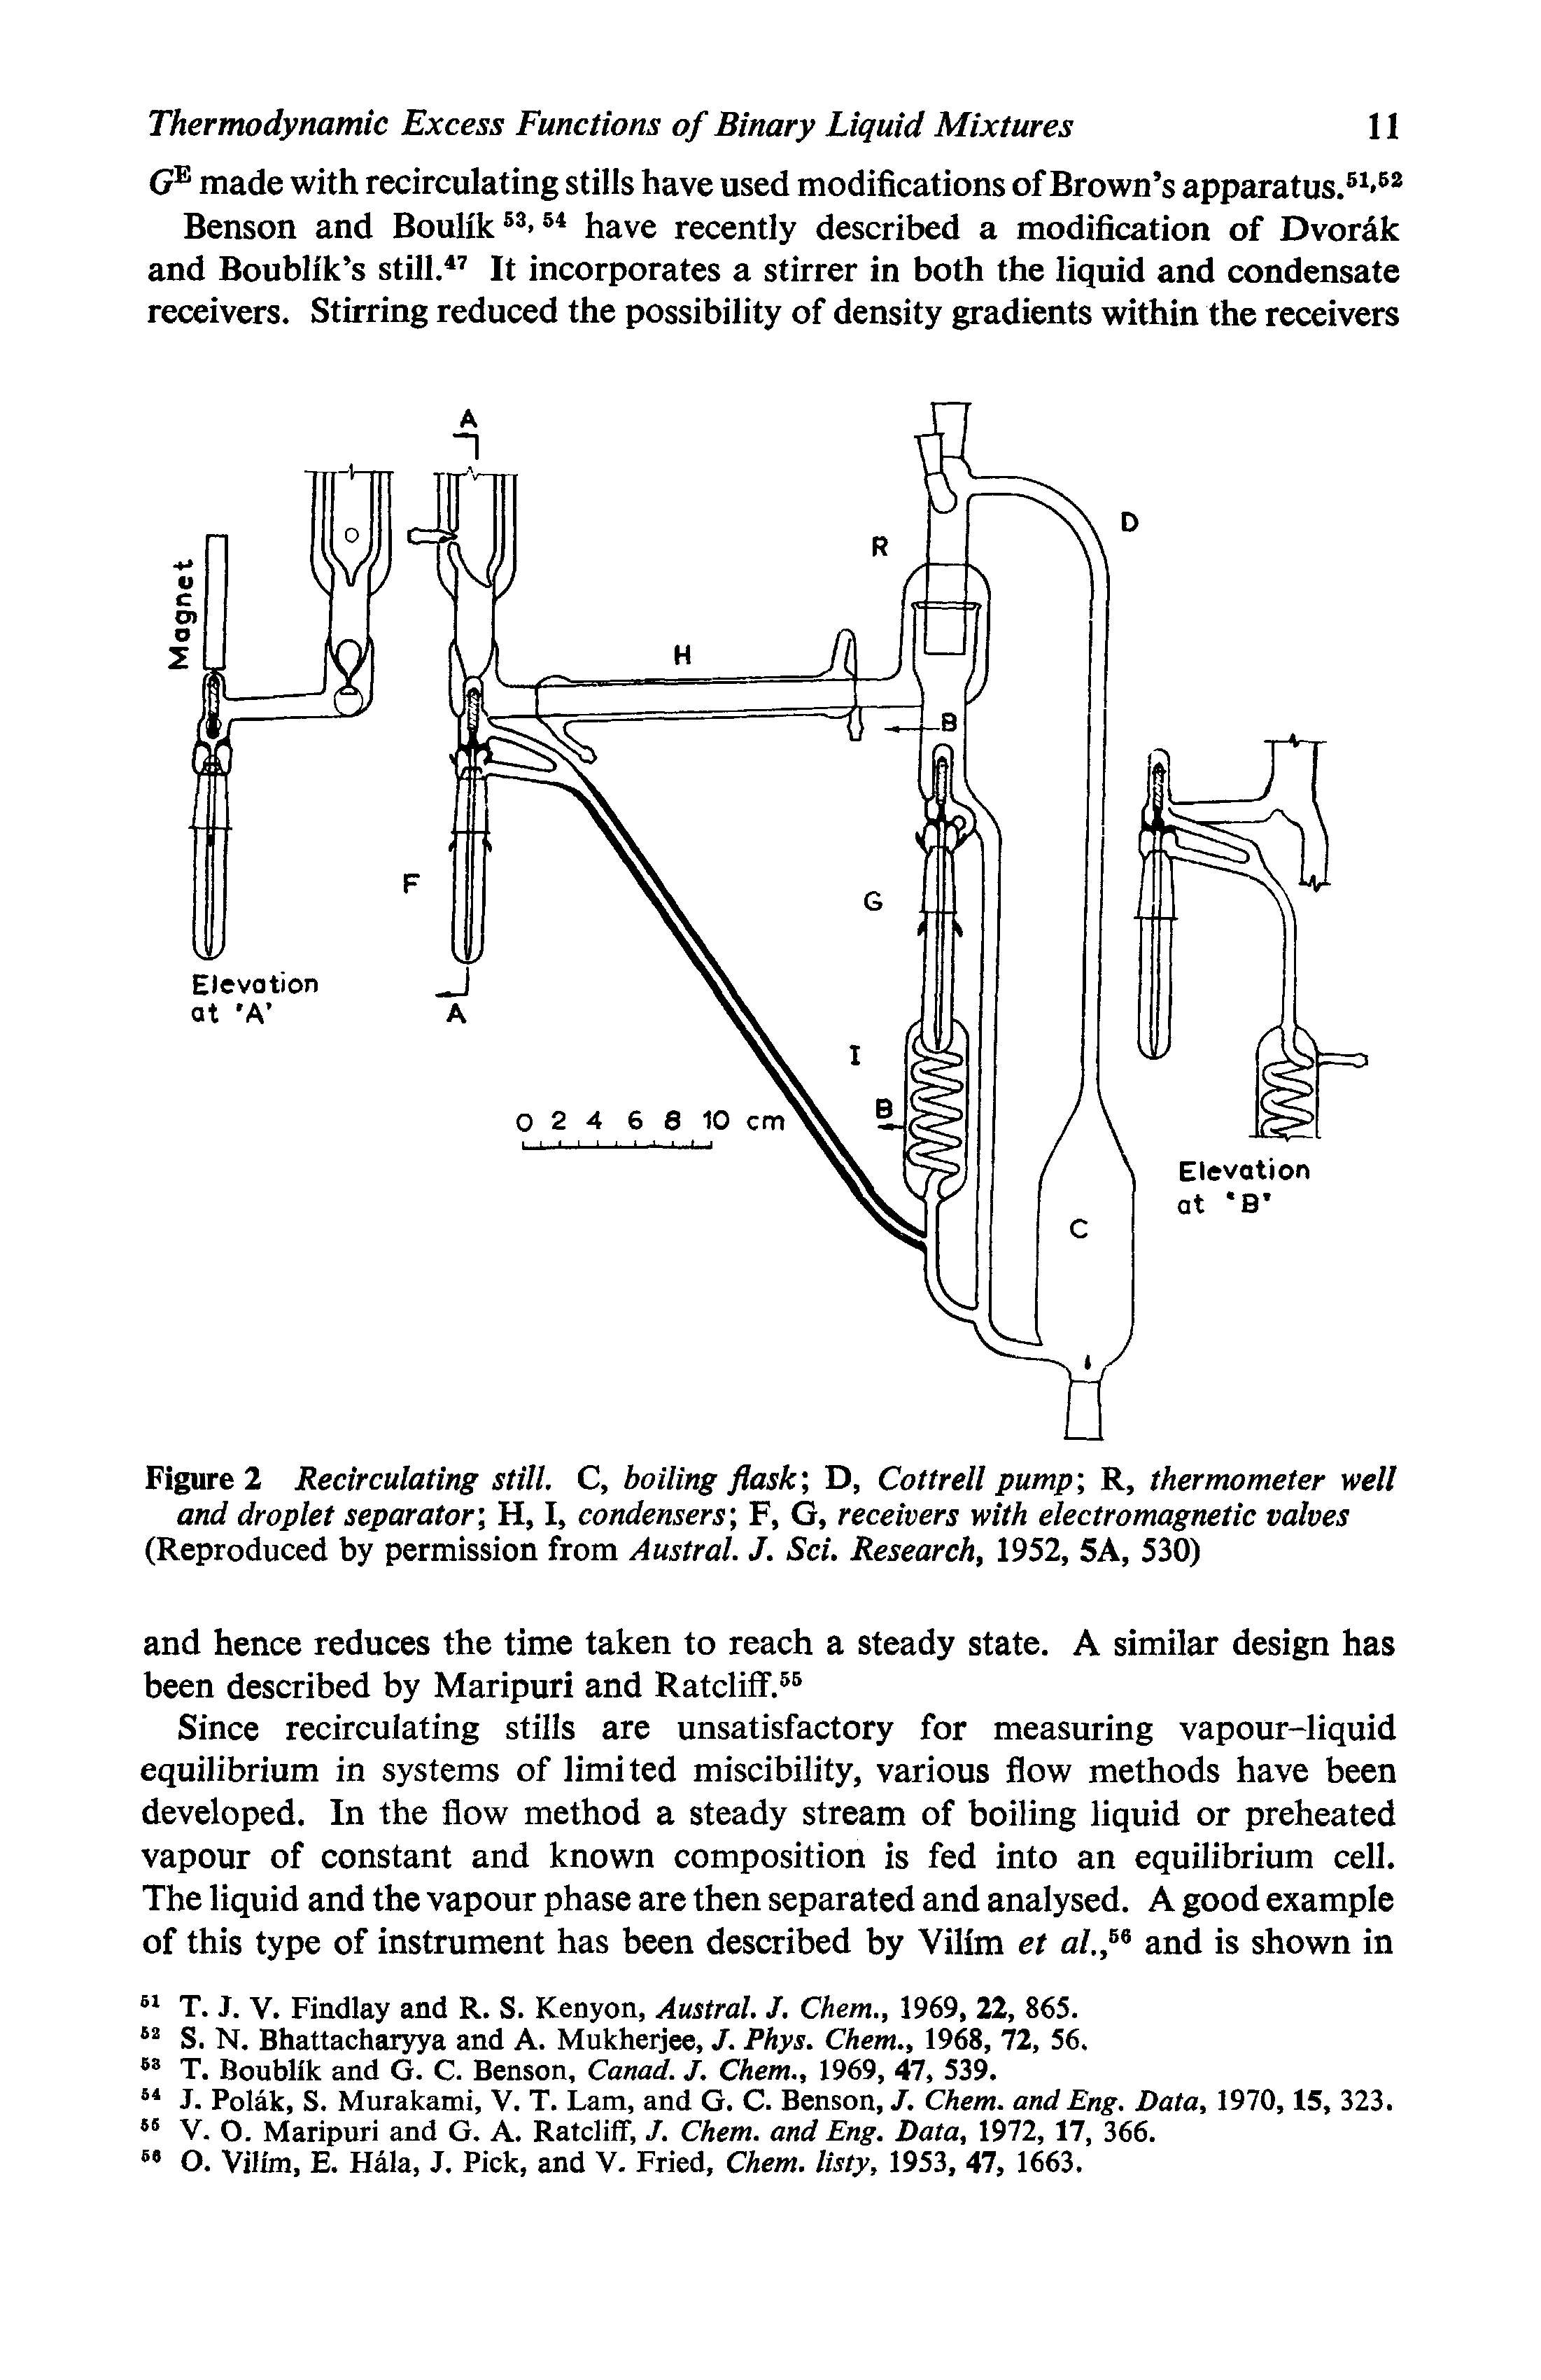 Figure 2 Recirculating still. C, boiling flask, D, Cottrell pump, R, thermometer well and droplet separator , H, I, condensers , F, G, receivers with electromagnetic valves (Reproduced by permission from Austral. J. Sci. Research, 1952, 5A, 530)...